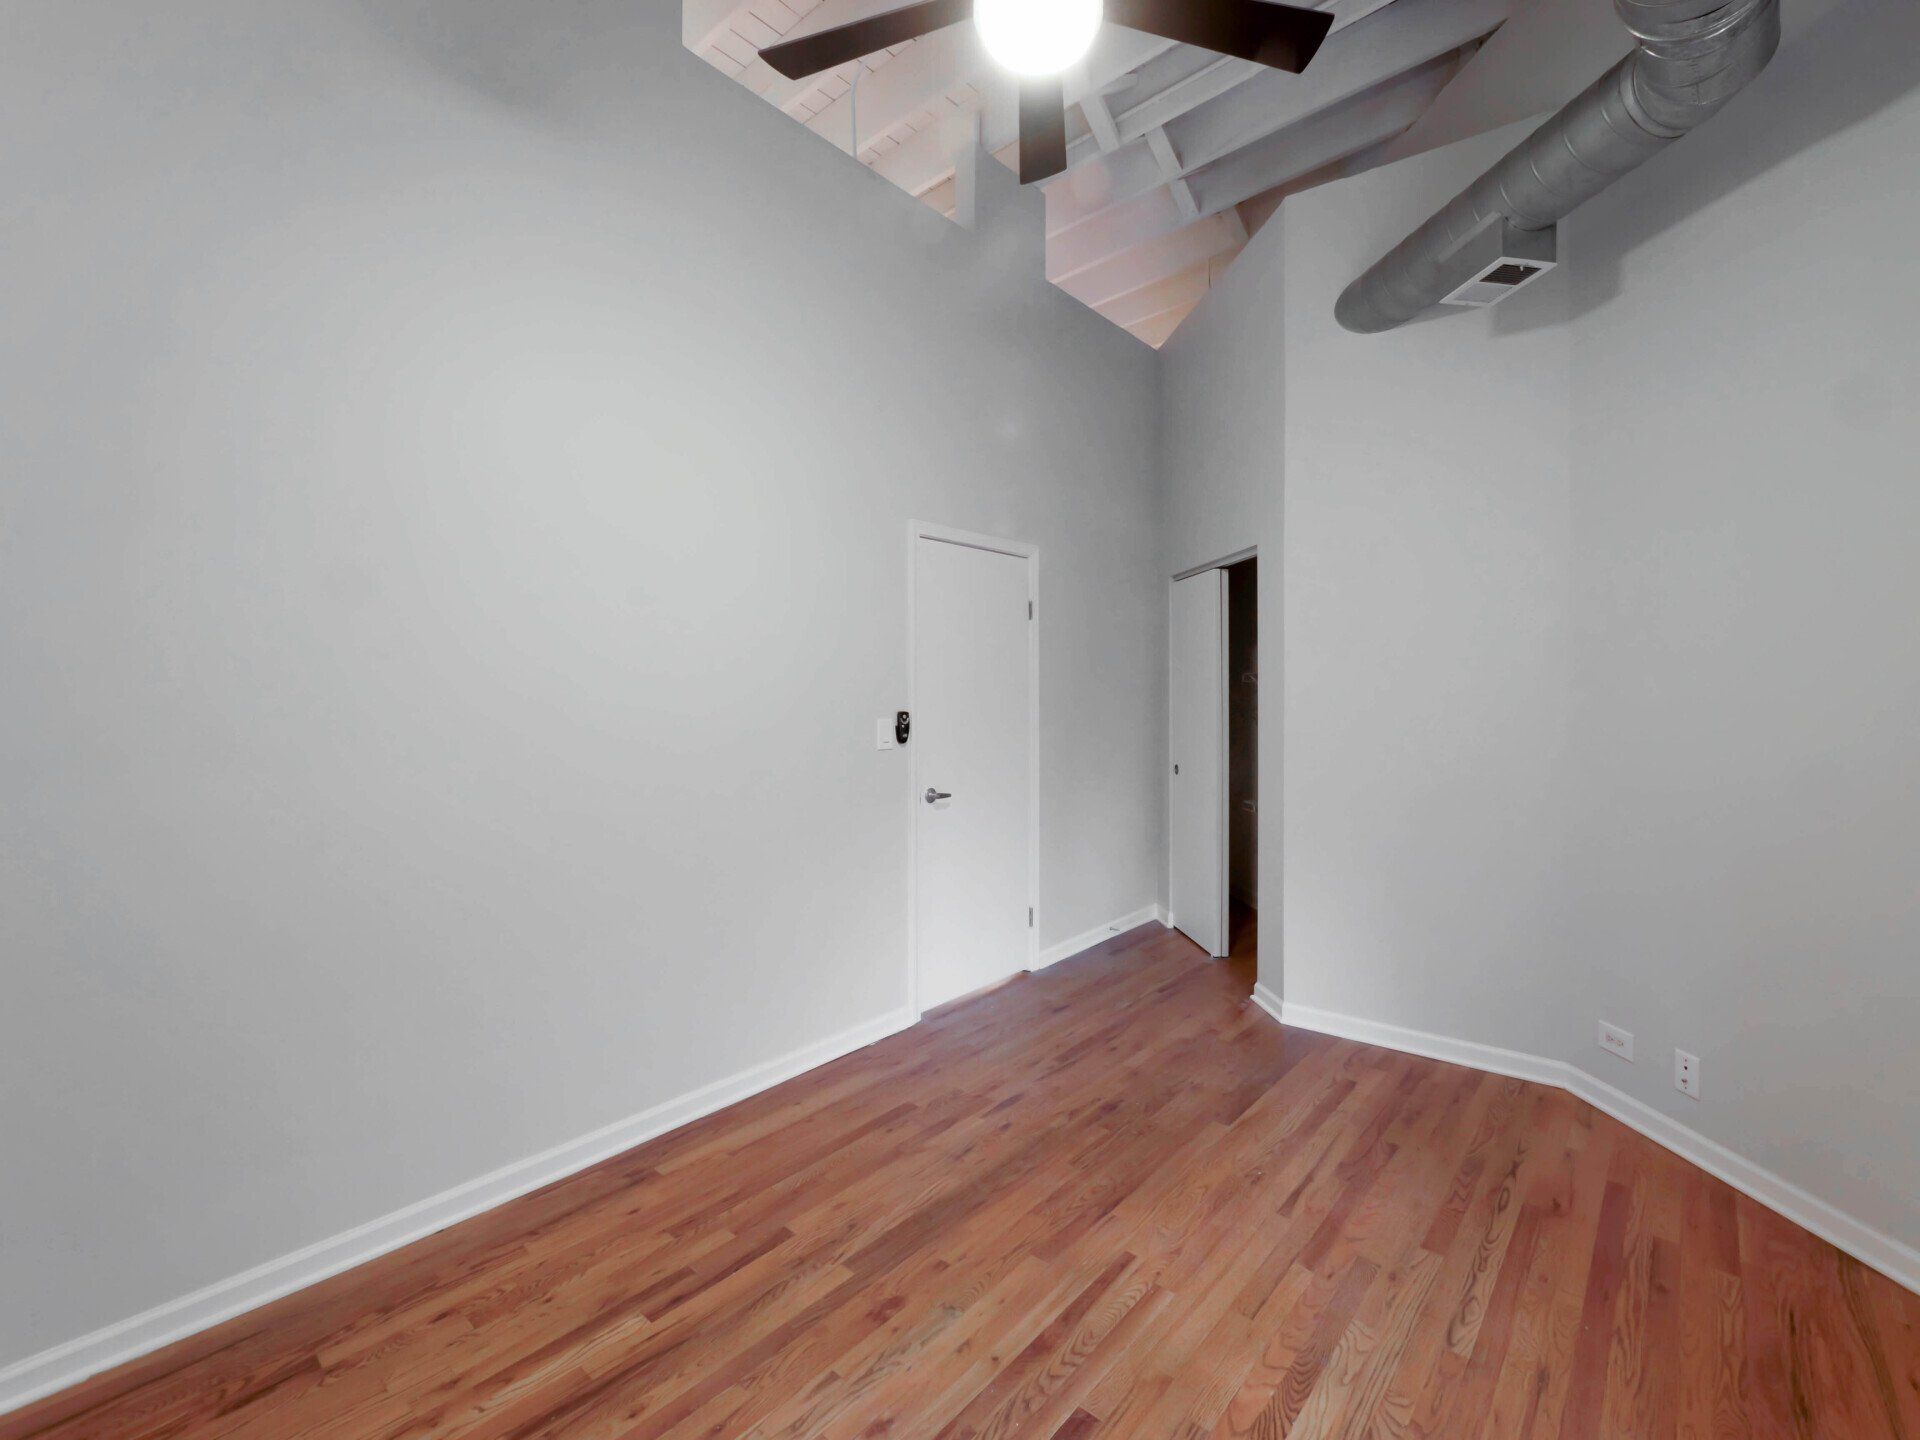 An empty room with hardwood floors and a ceiling fan at 1550 North Damen.